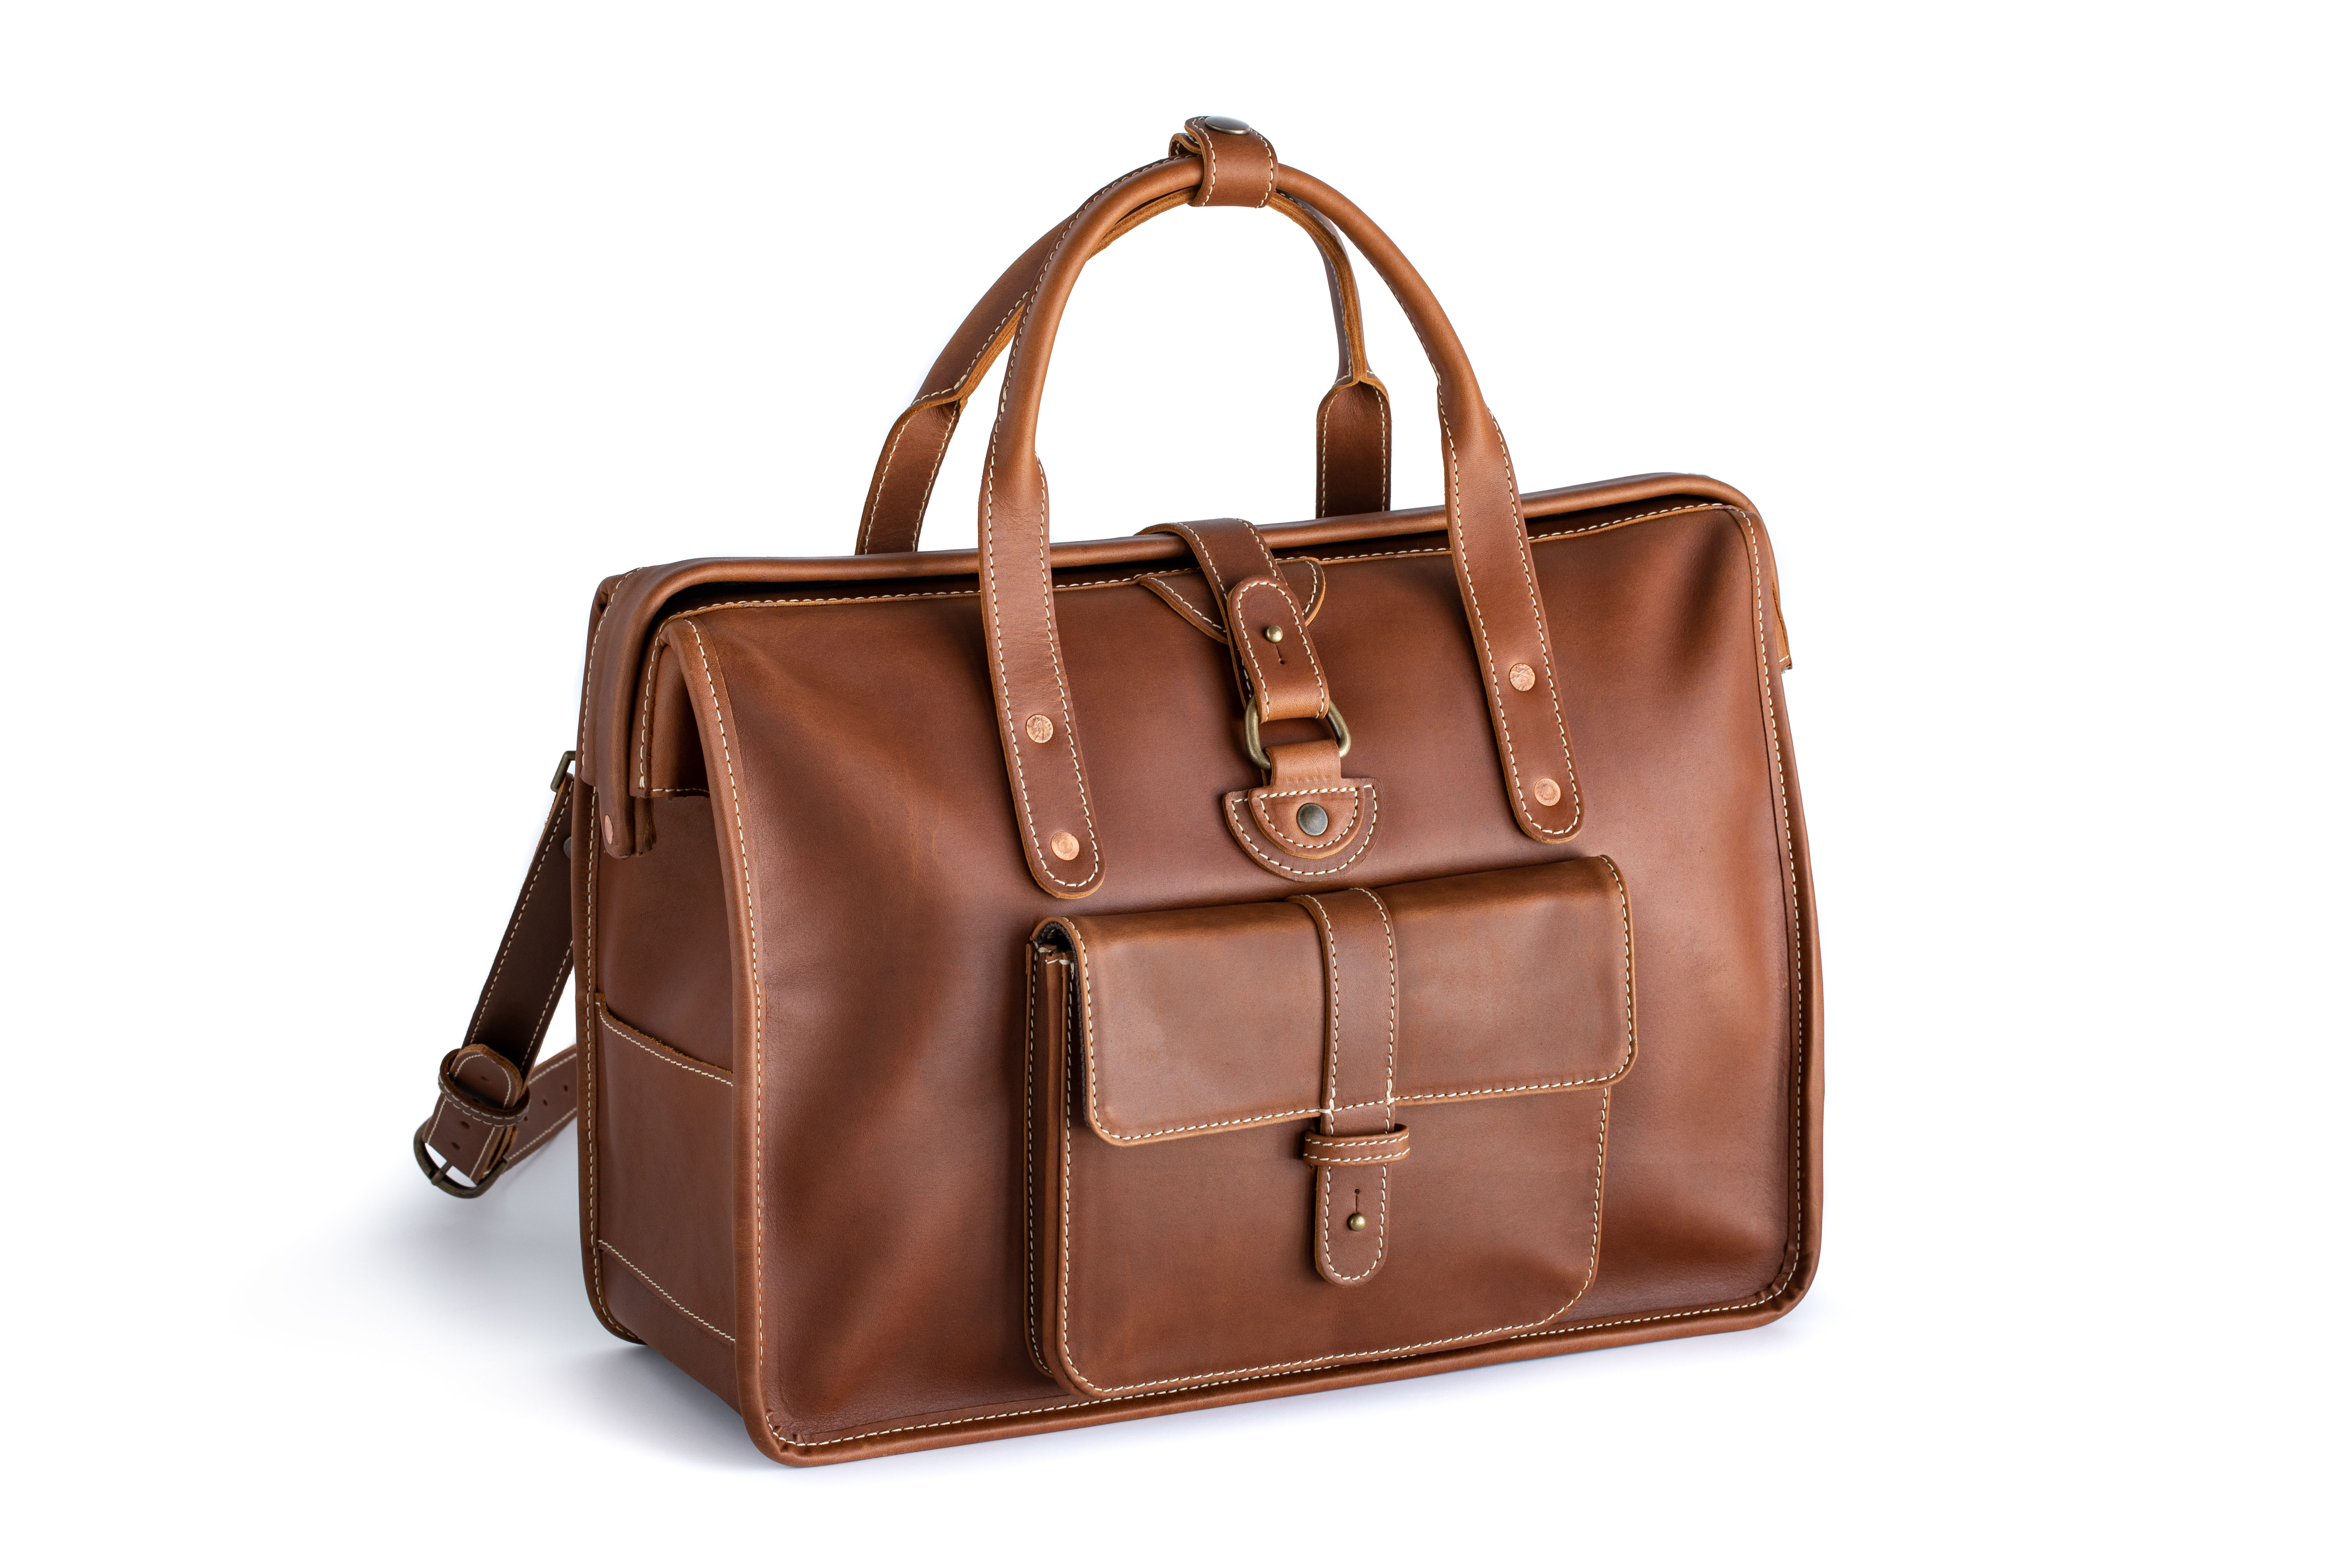 Best Leather Messenger Bags for Men from Pad & Quill